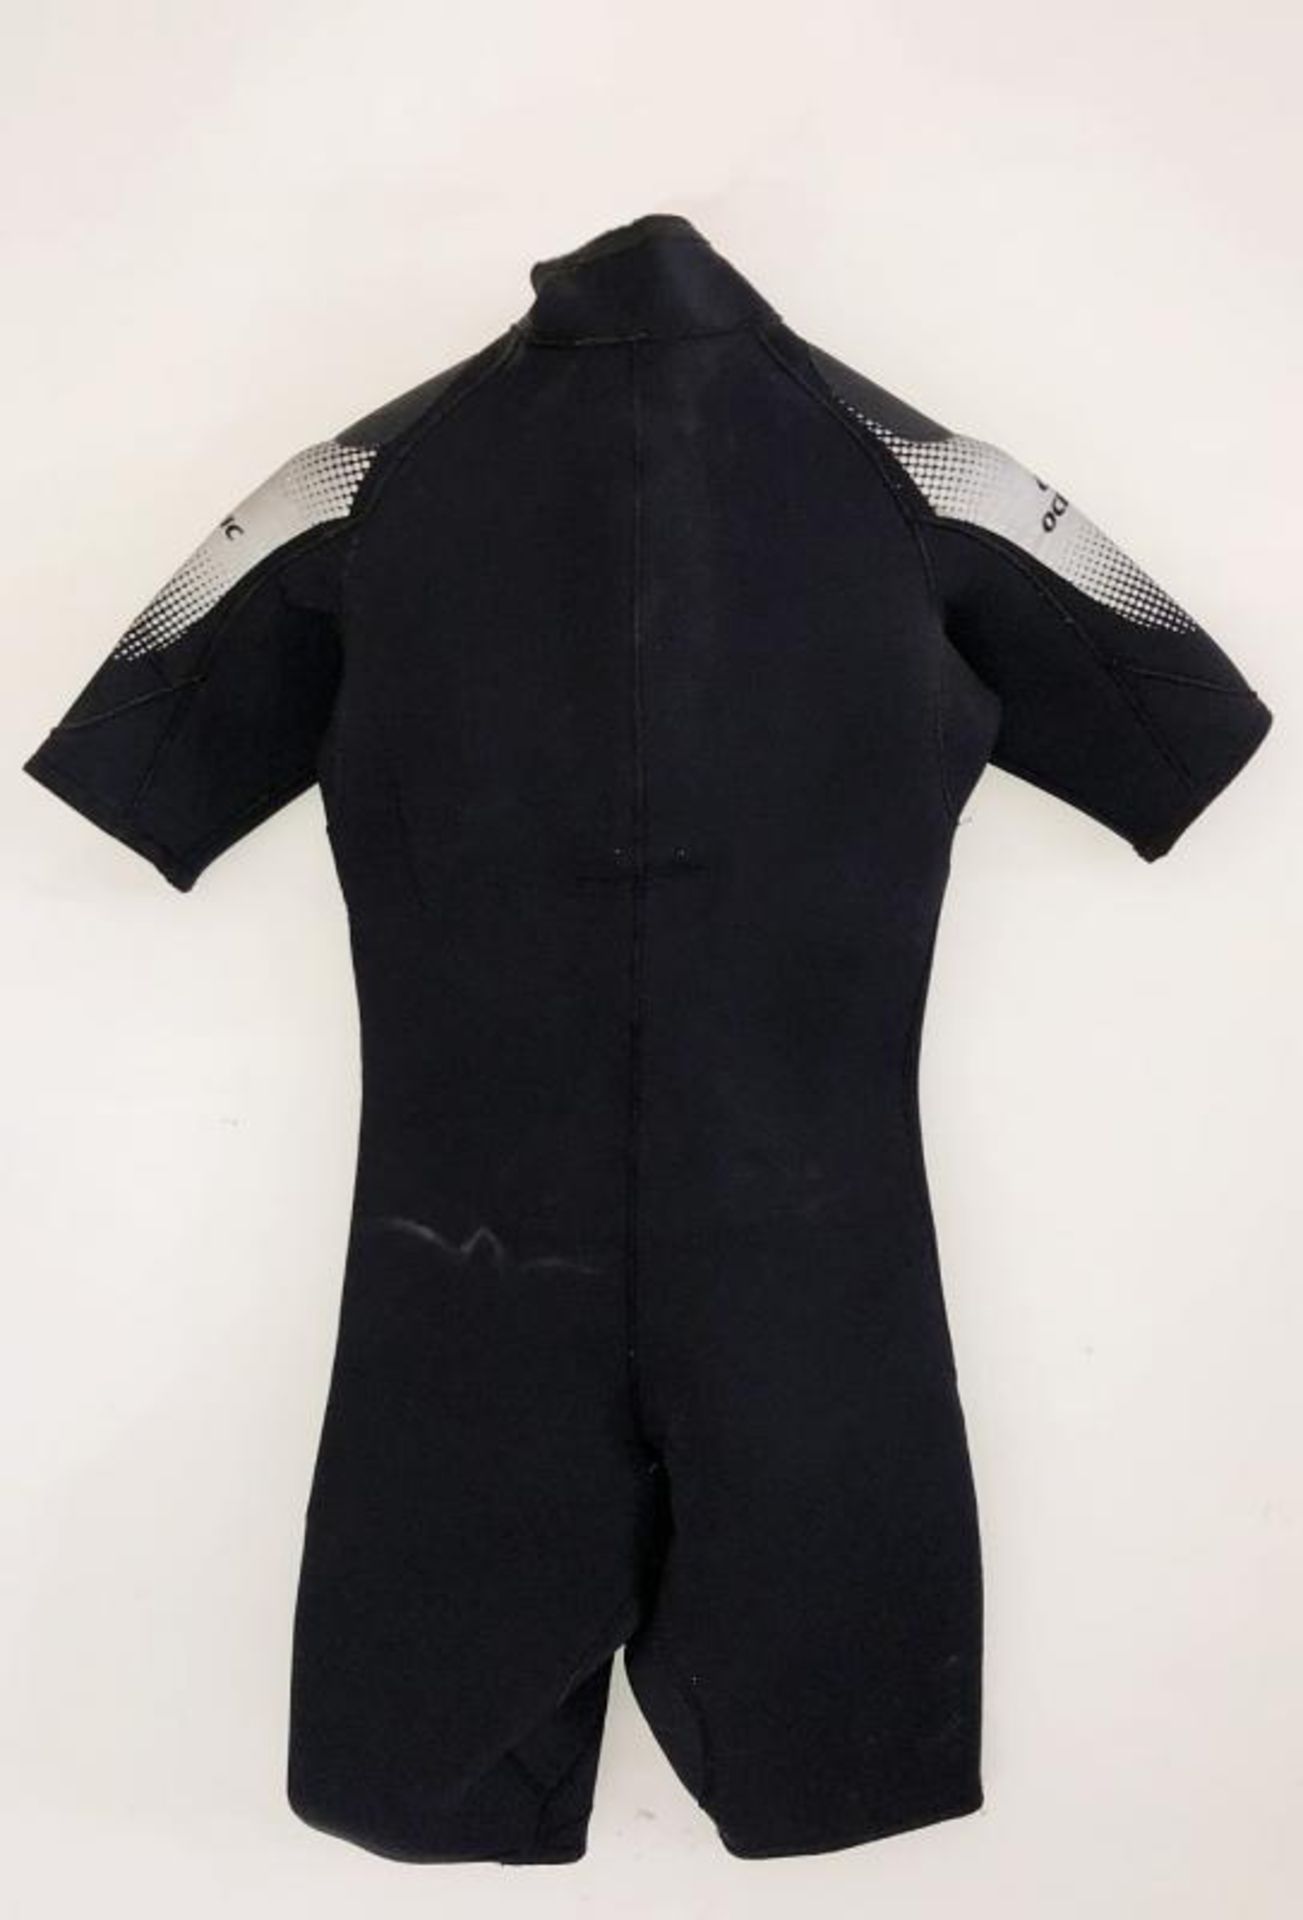 1 x Small Oceanic Shadow Titanium Shortie Wetsuit In Black - Ref: NS354 - CL349 - Location: Altrinch - Image 5 of 5